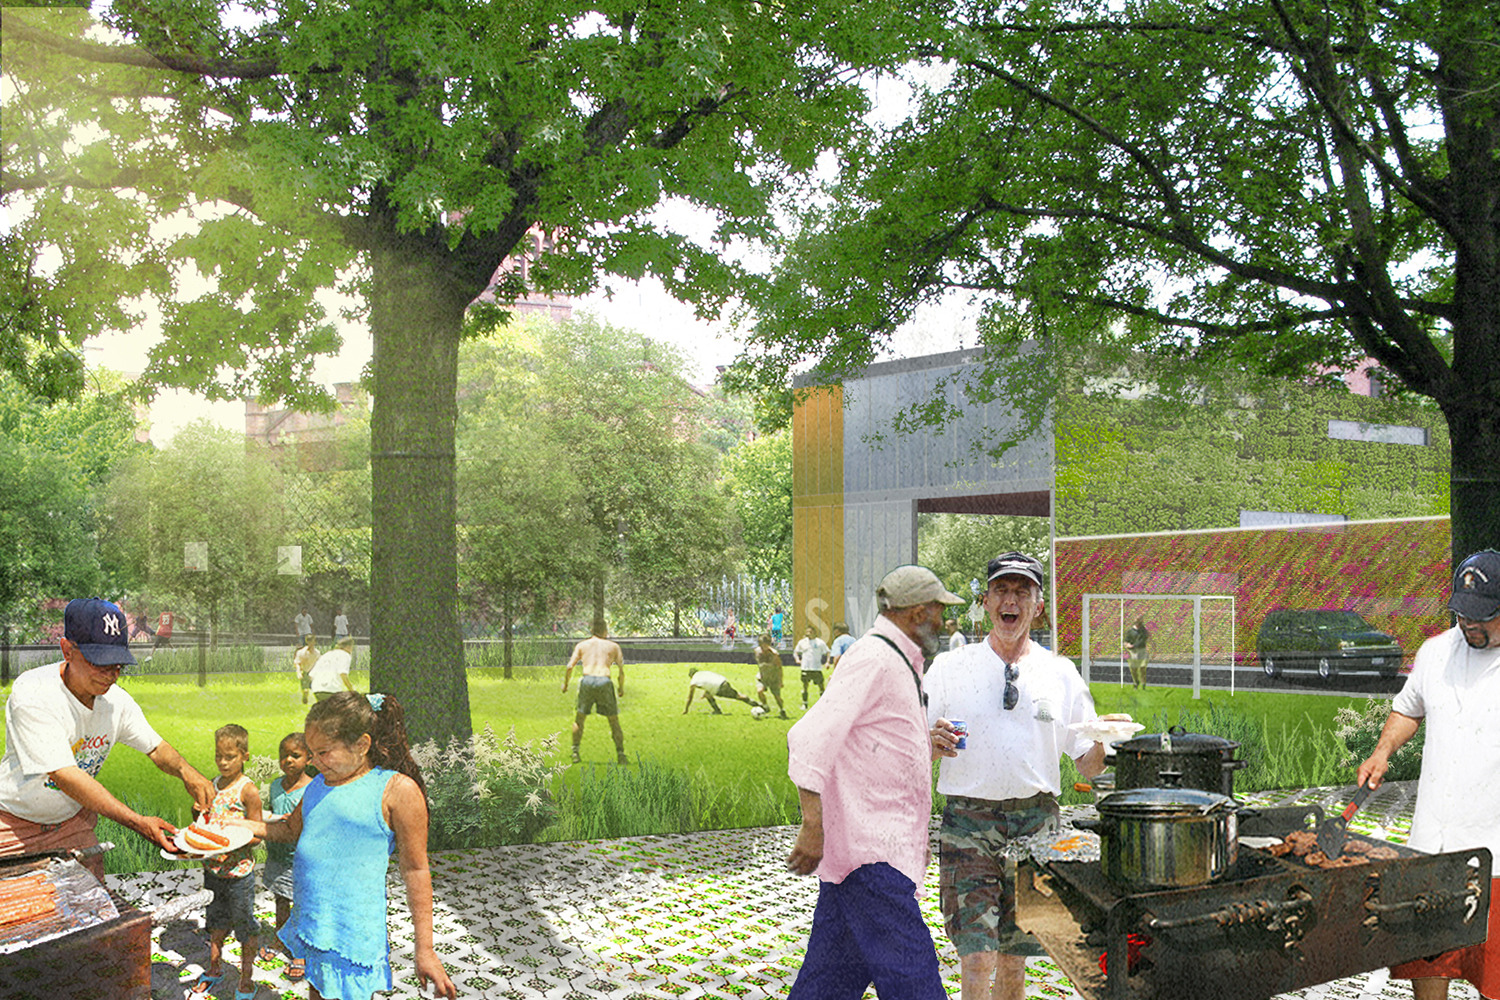 rendering of proposed design people populate a park